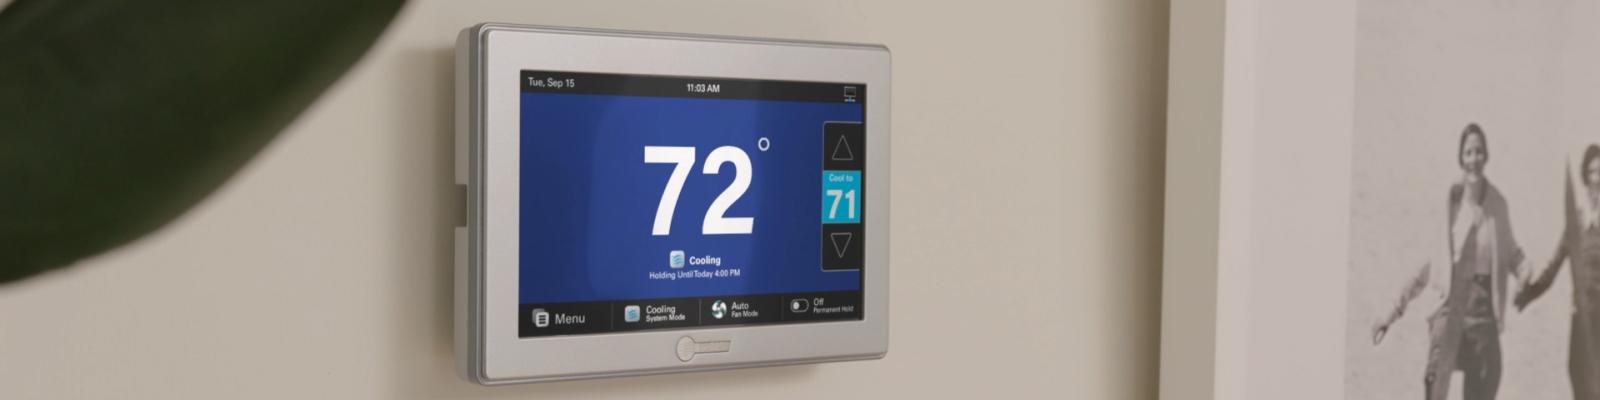 How to Choose the Right Smart Thermostat for Your Home - Trane®